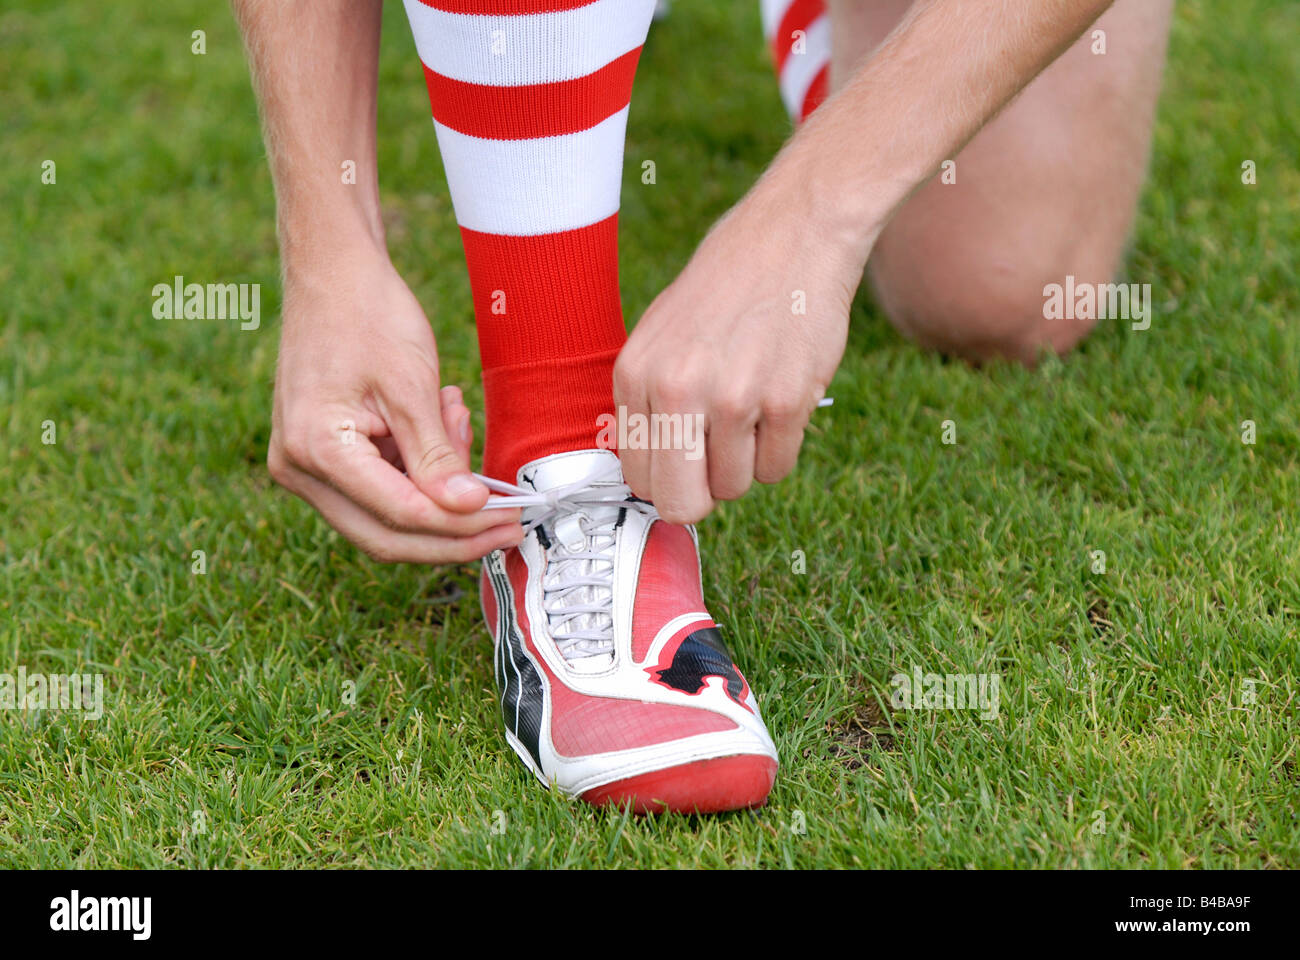 Soccerplayer laces up his red and white Puma soccershoes Stock Photo